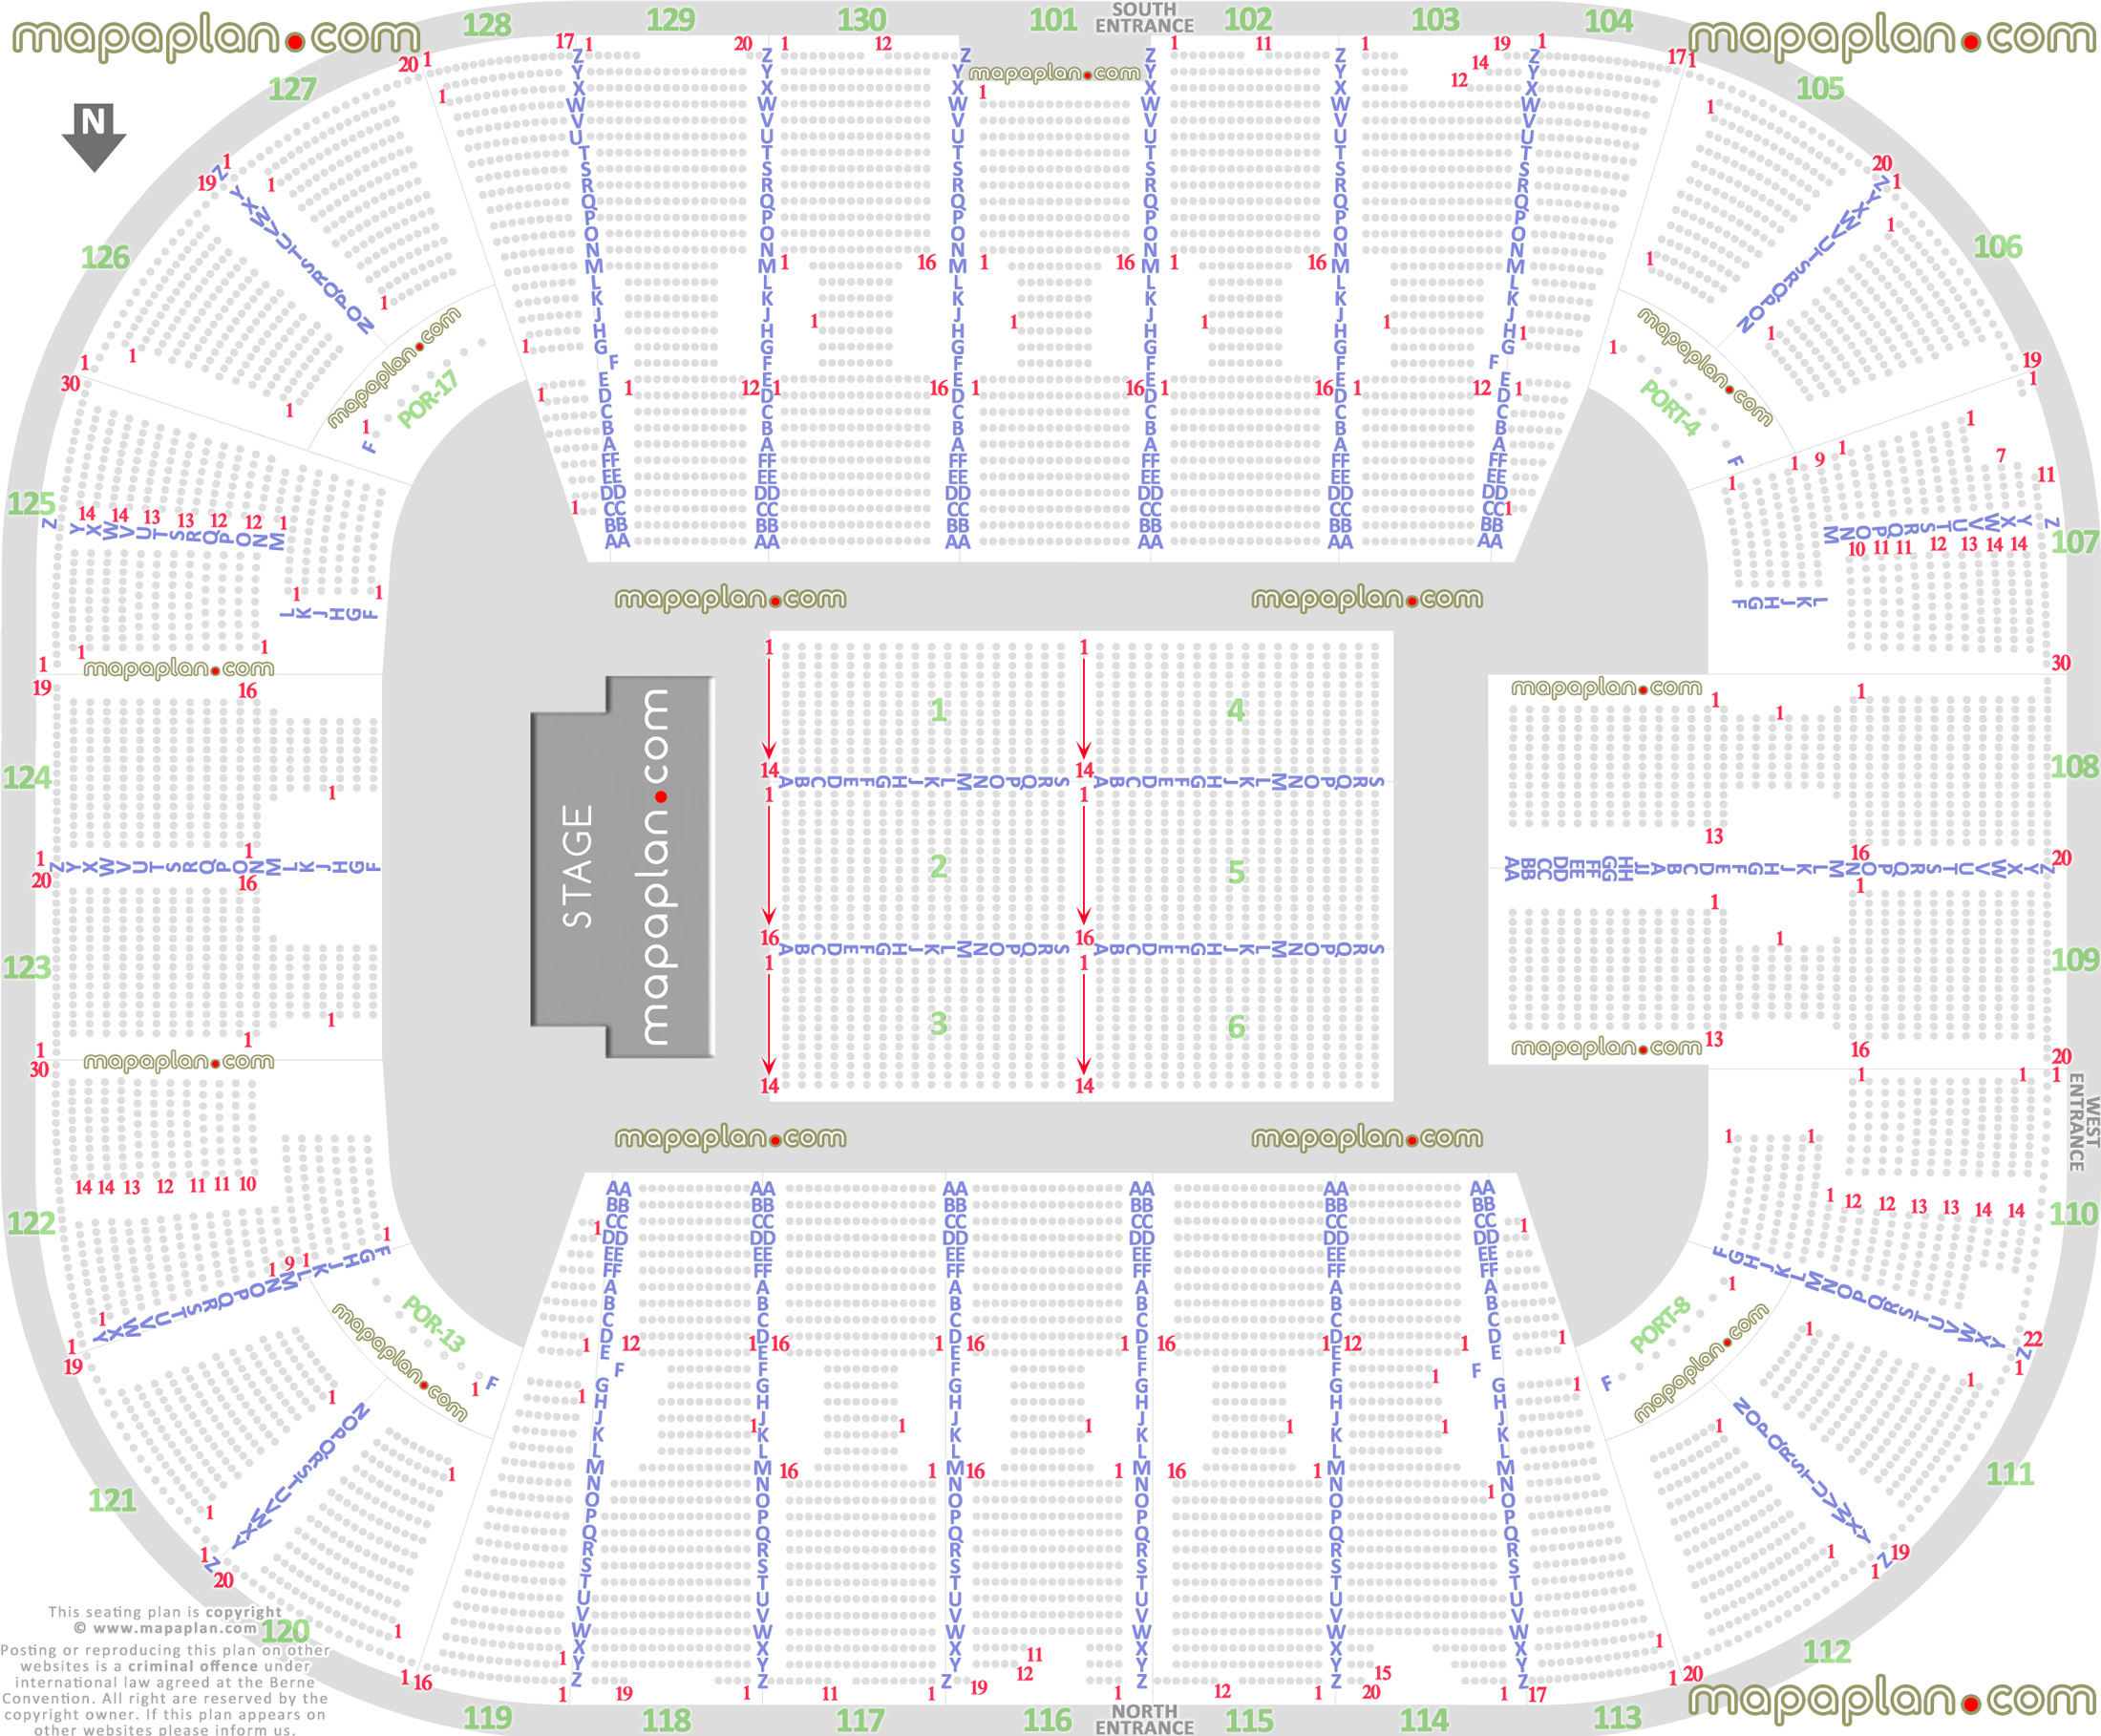 detailed seat row numbers end stage concert sections floor plan map arena concourse level layout Fairfax EagleBank Arena seating chart